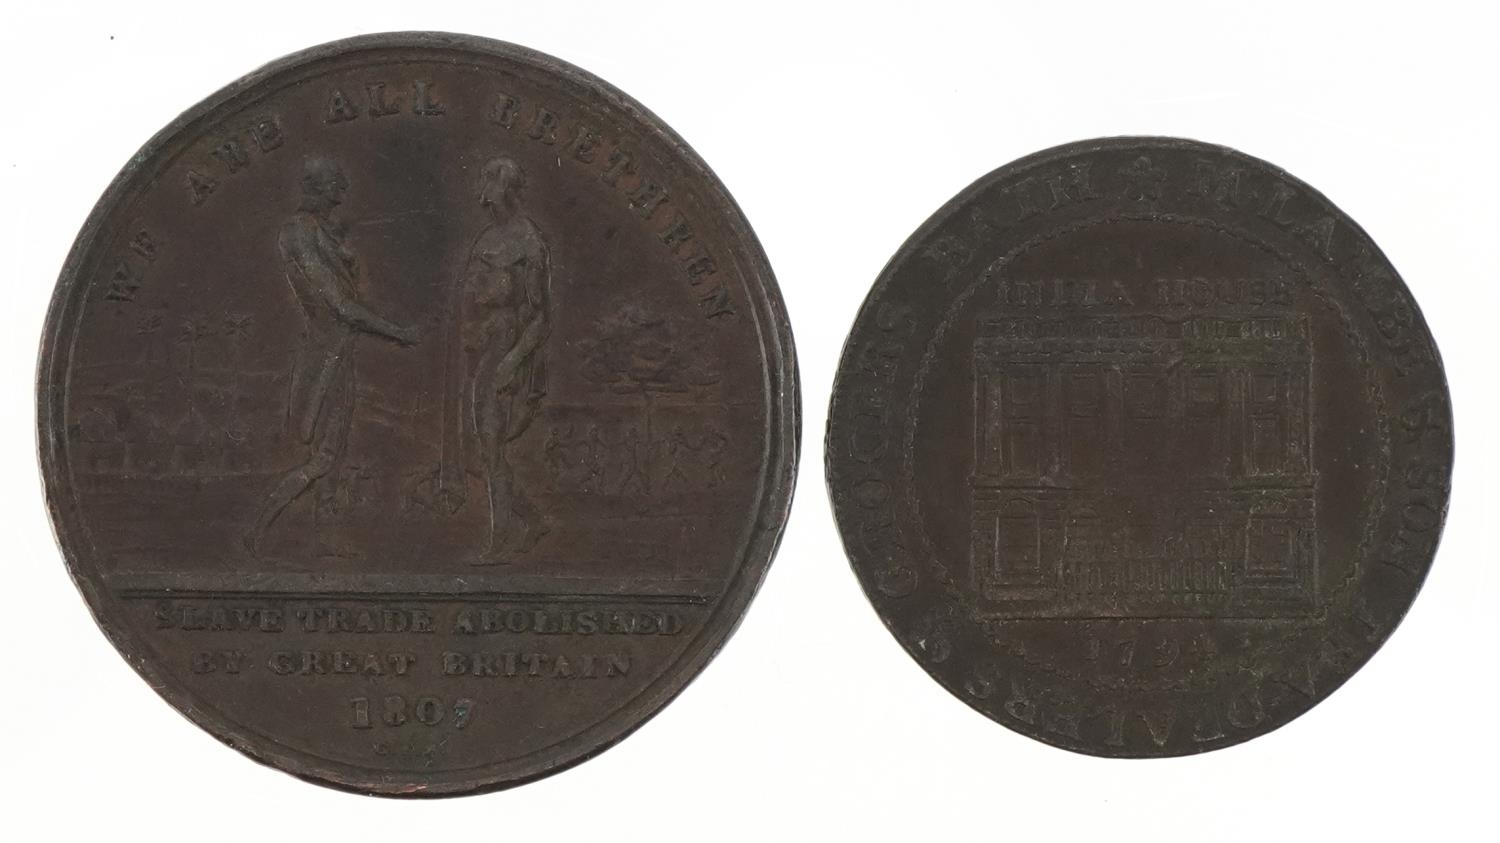 M Lambre & Son, copper trade token for coffee spices and sugars together with a slavery abolition